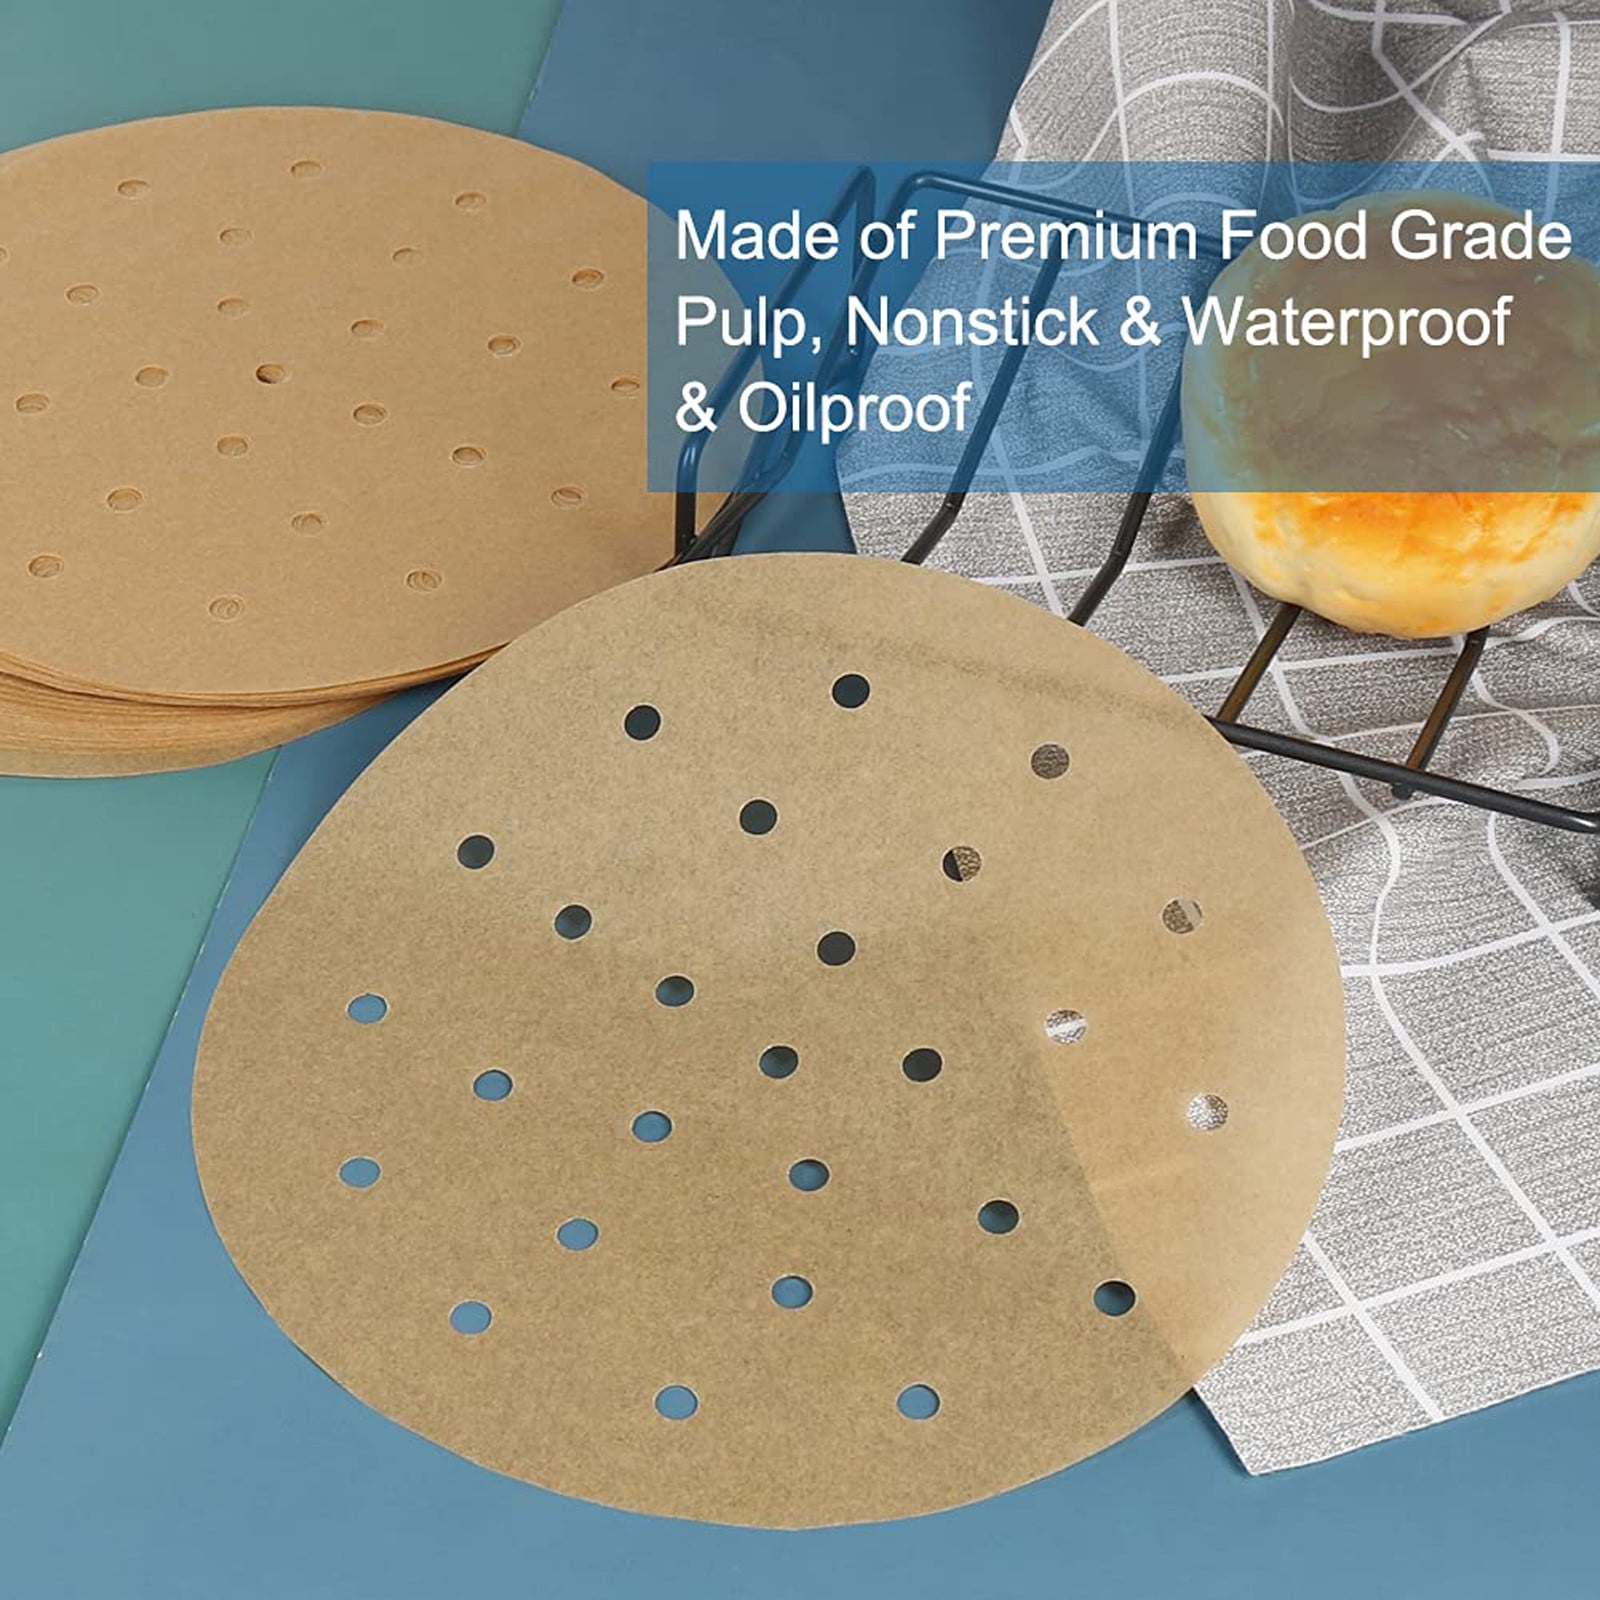 Tking Fashion Air Fryer Pad Paper Food Baking Paper High Temperature Resistant Fryer - Brown, Size: 8.4